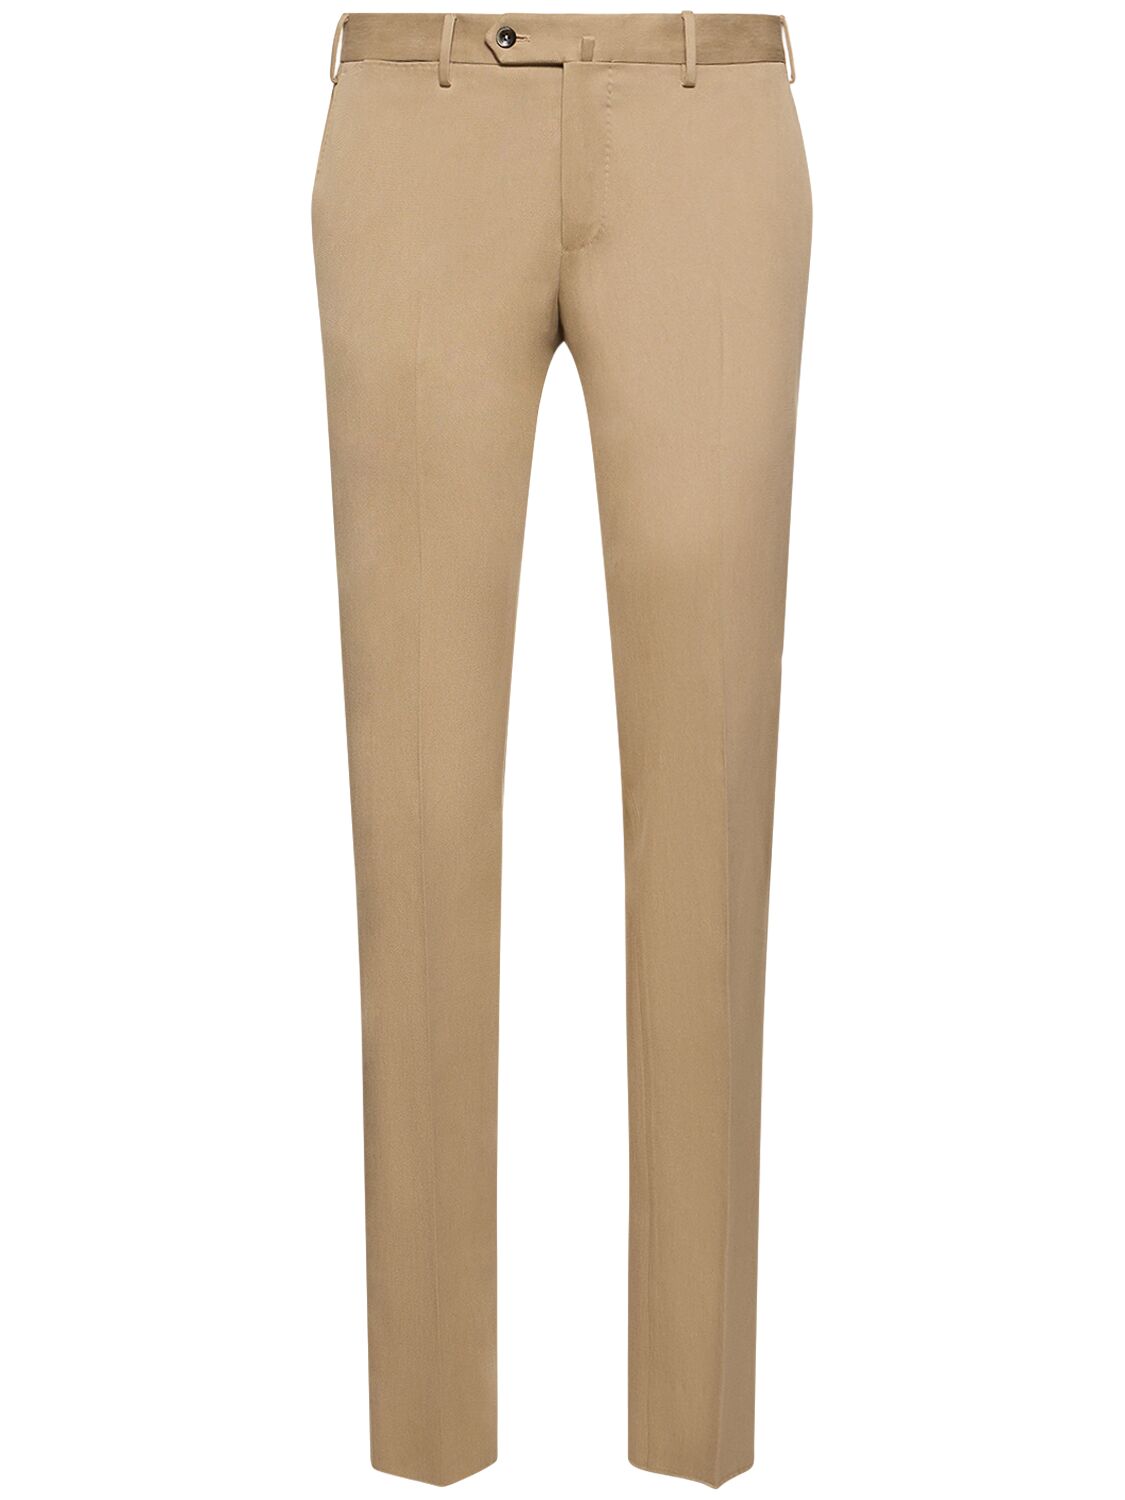 Pt Torino Classic Cotton Blend Straight Pants In Beige